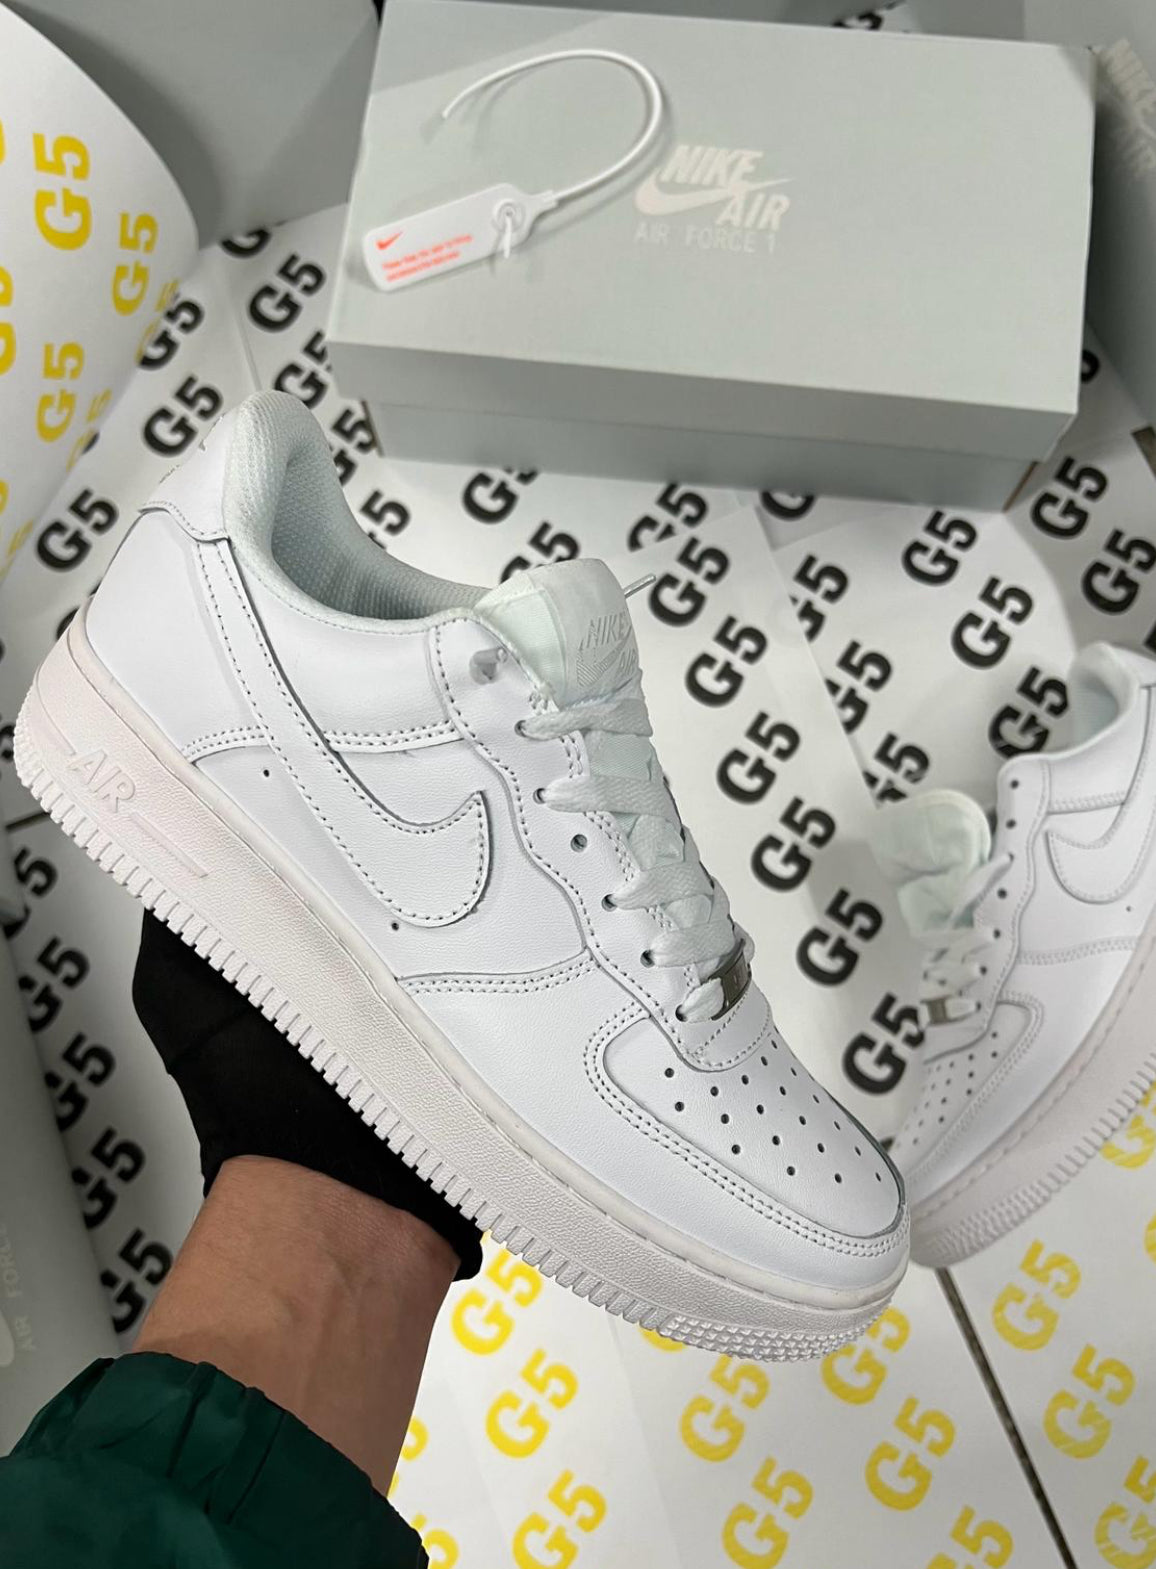 Air force One “G5 Quality”